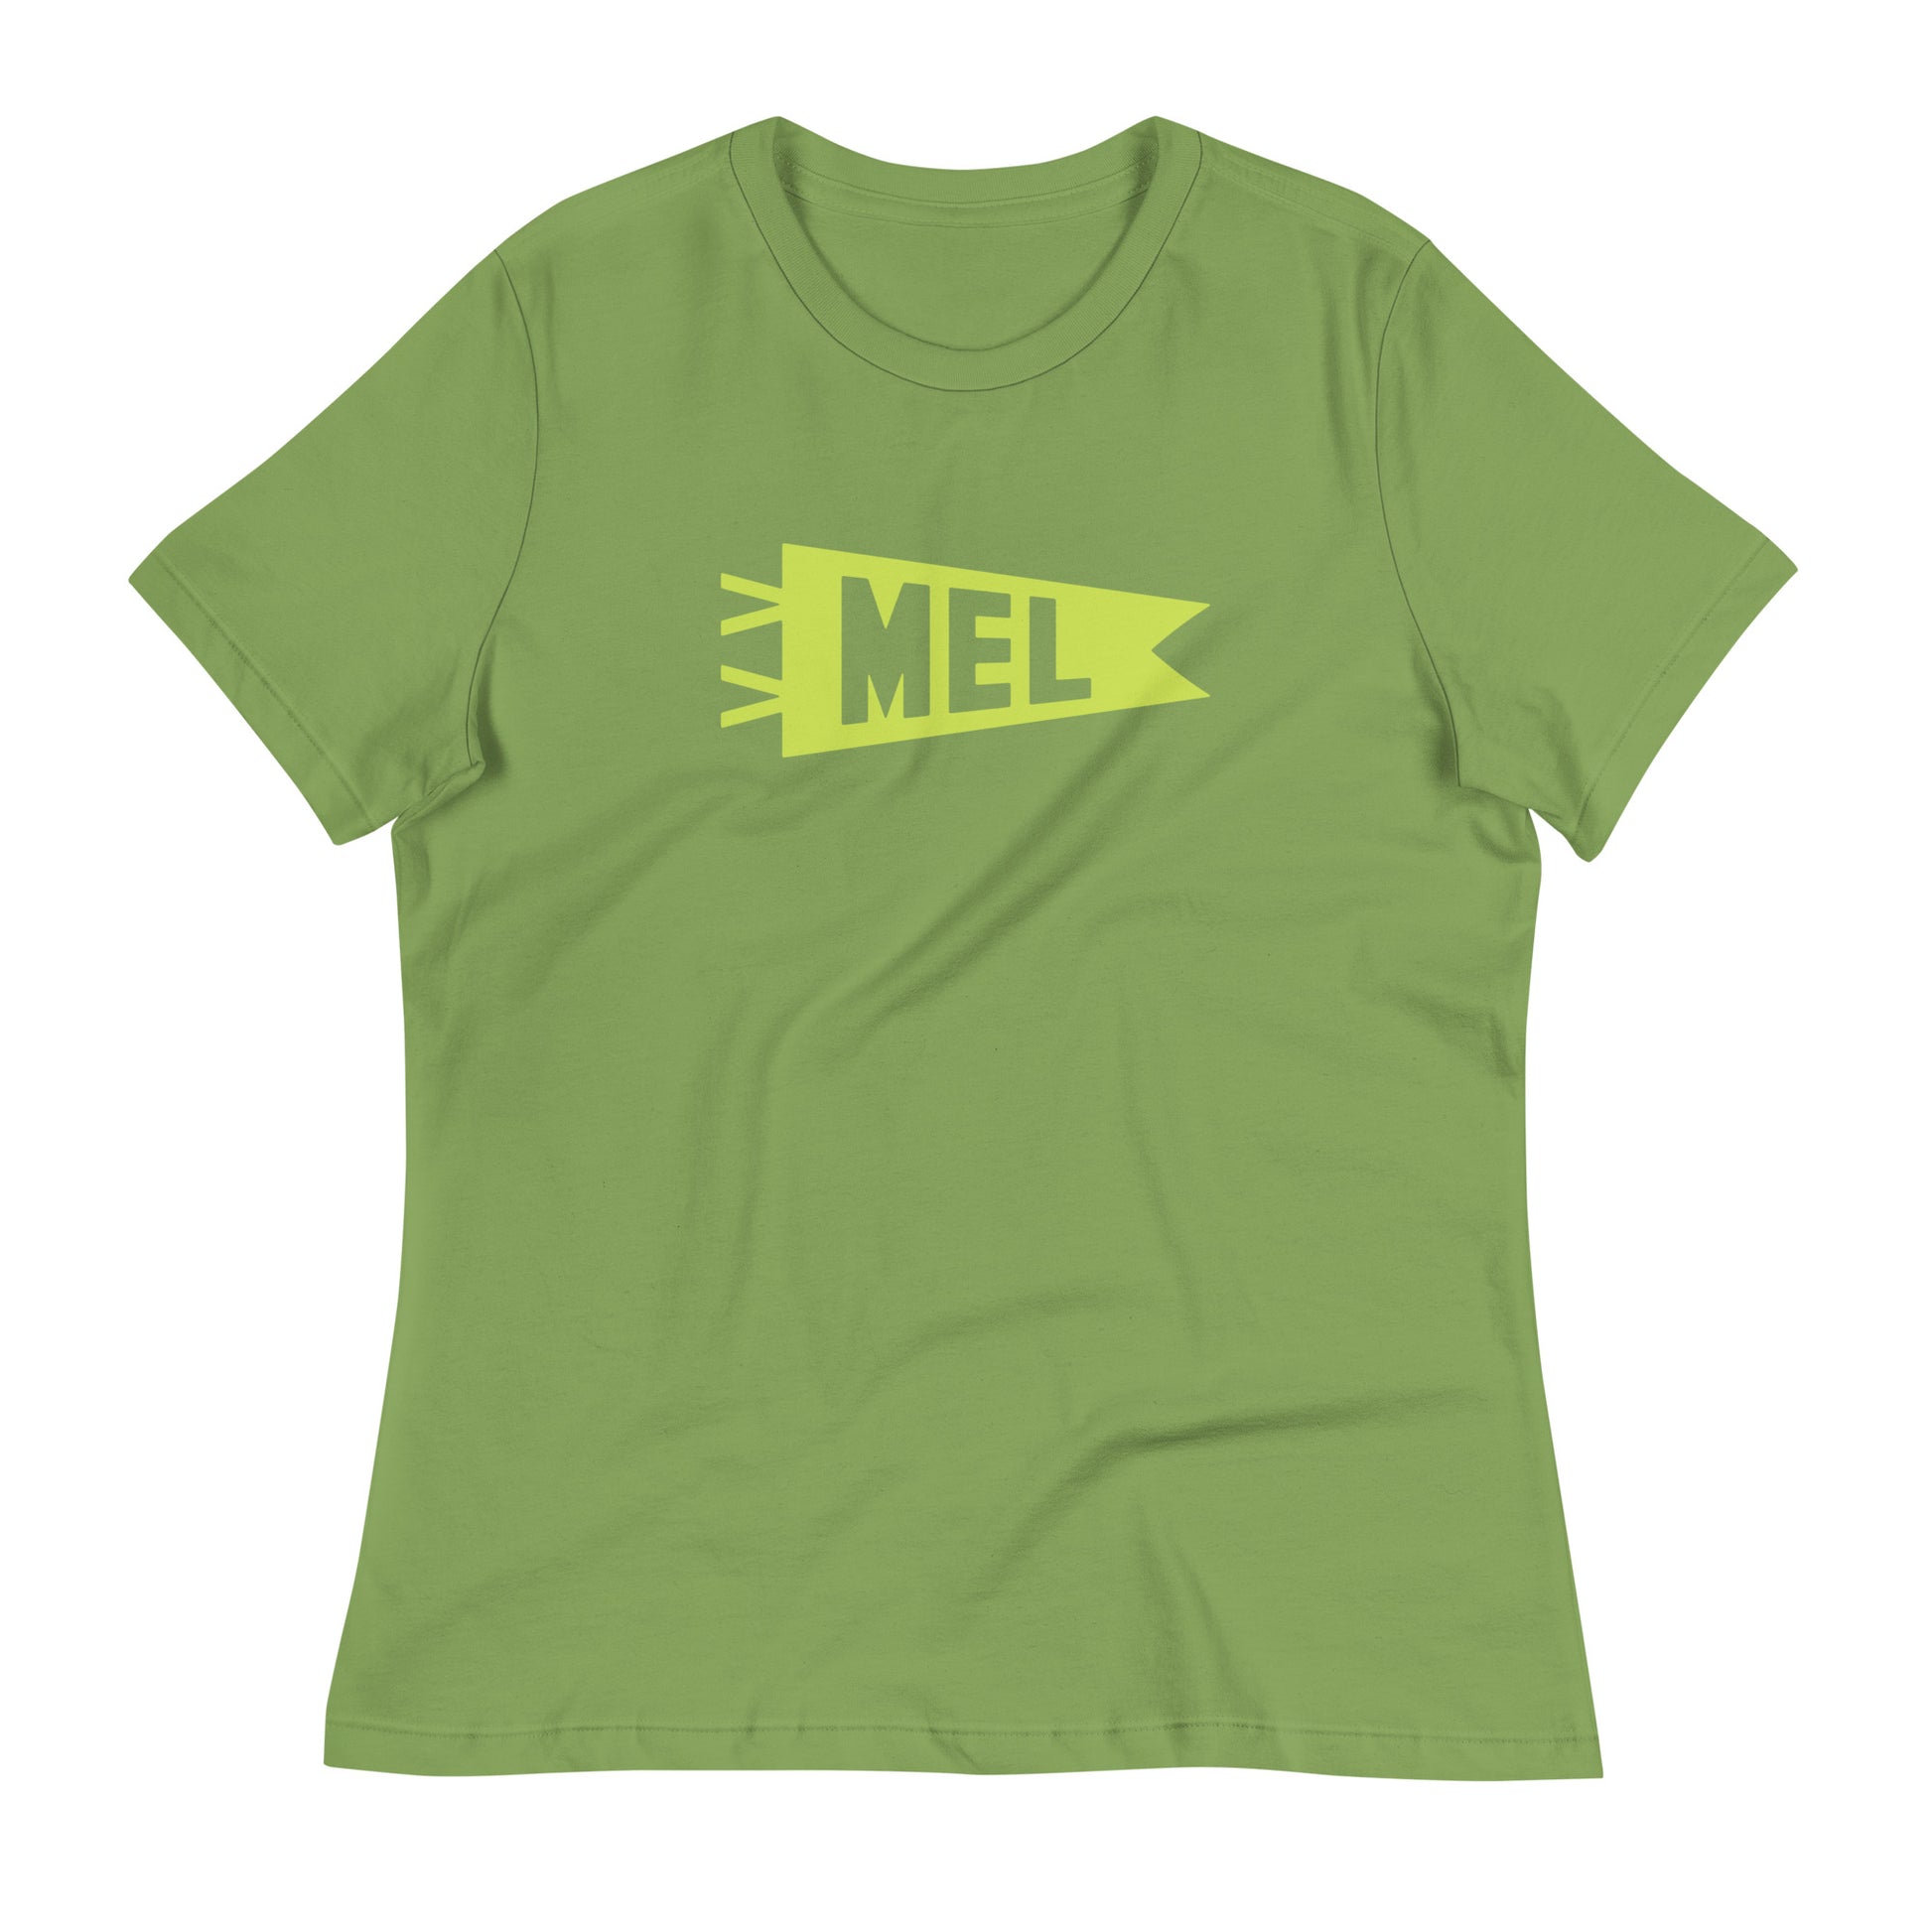 Airport Code Women's Tee - Green Graphic • MEL Melbourne • YHM Designs - Image 02